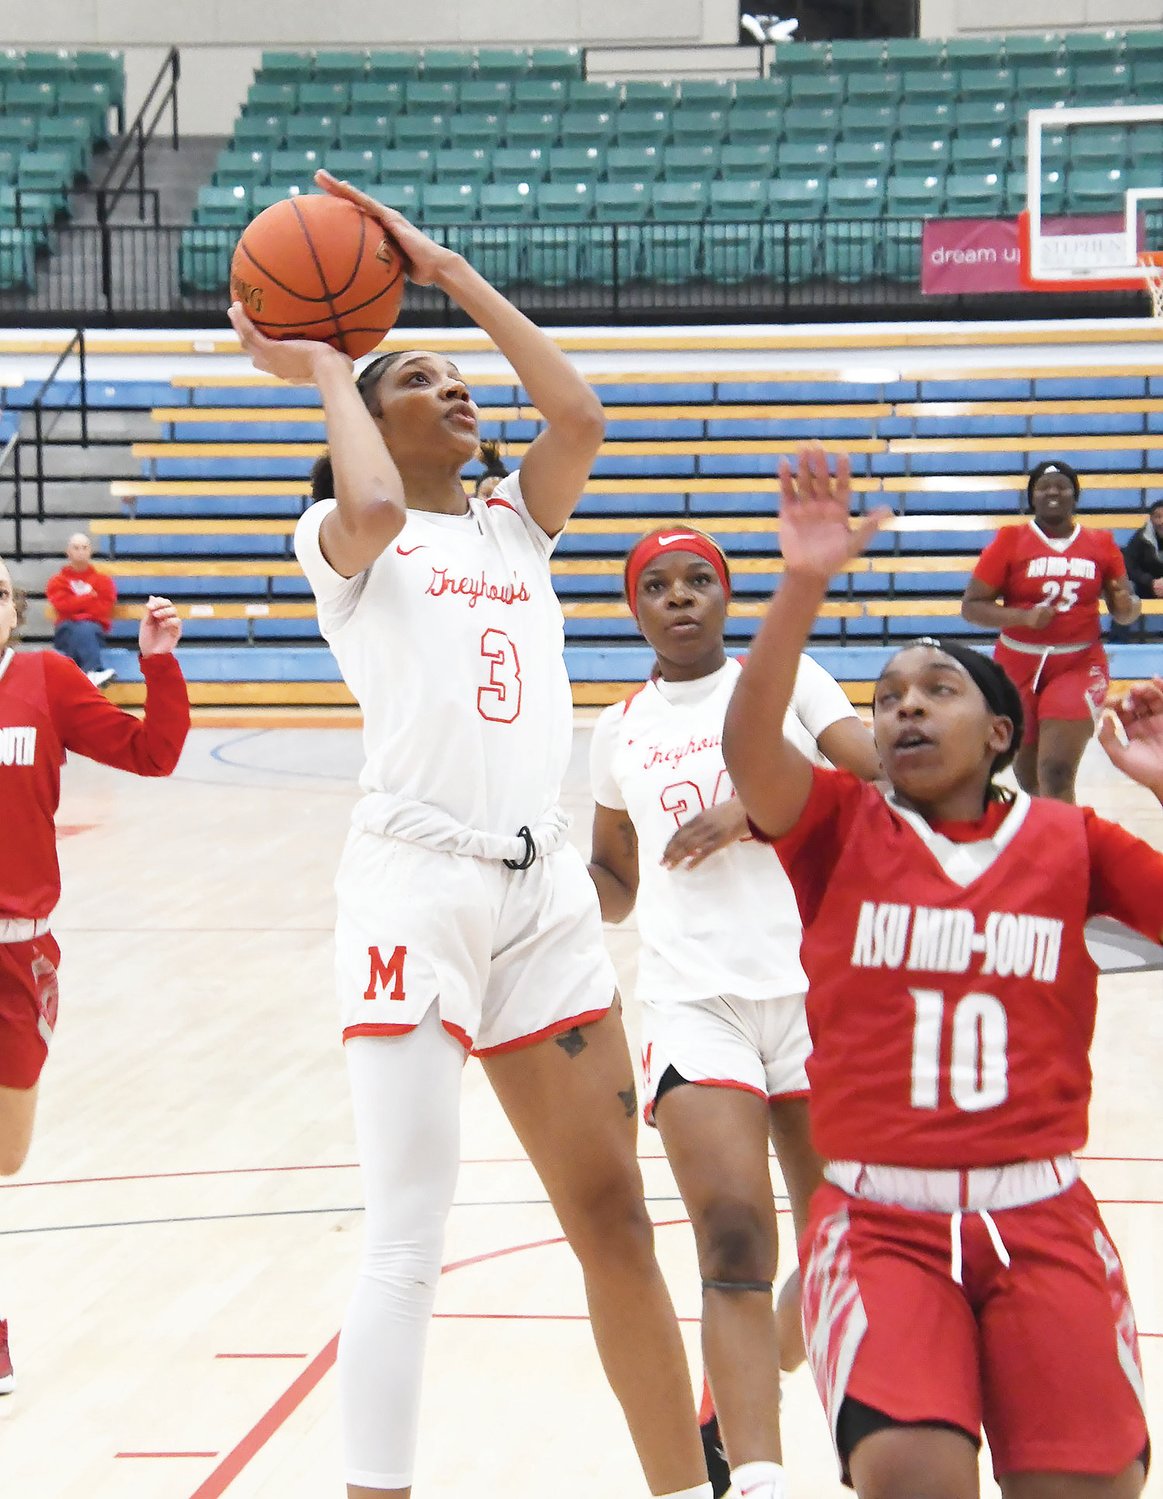 Moberly Area Community College's T'Aaliyah Miner (3) scores inside while defended by Quintasia Leatherwood from Arkansas State University Mid-South.